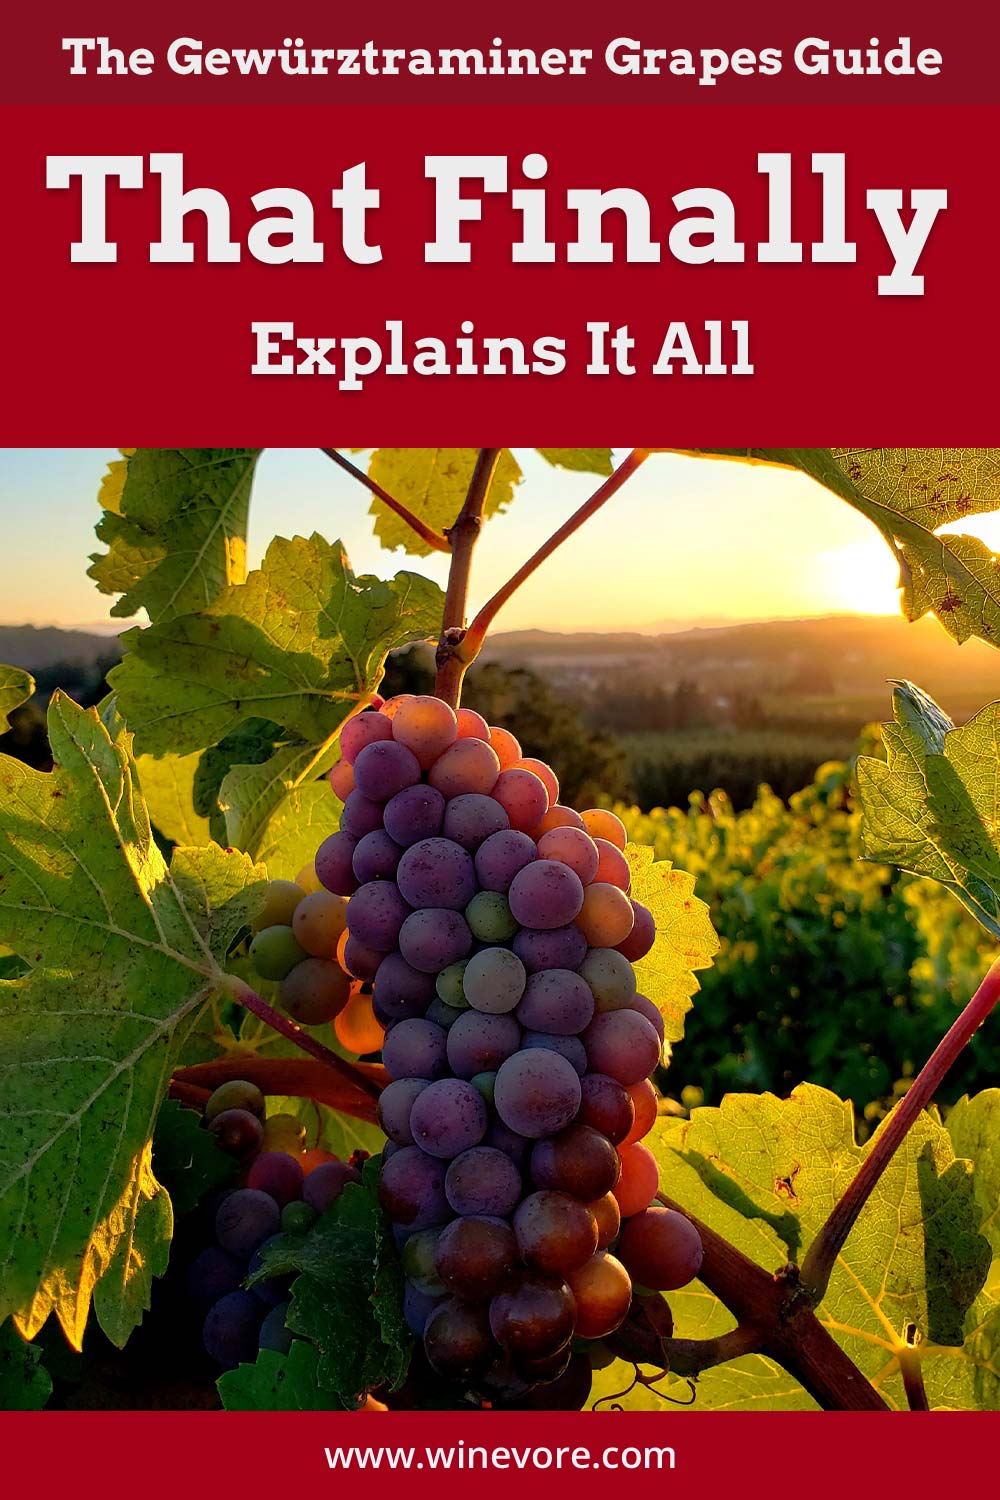 A bunch of grapes on a grape tree - Gewürztraminer Grapes Guide.